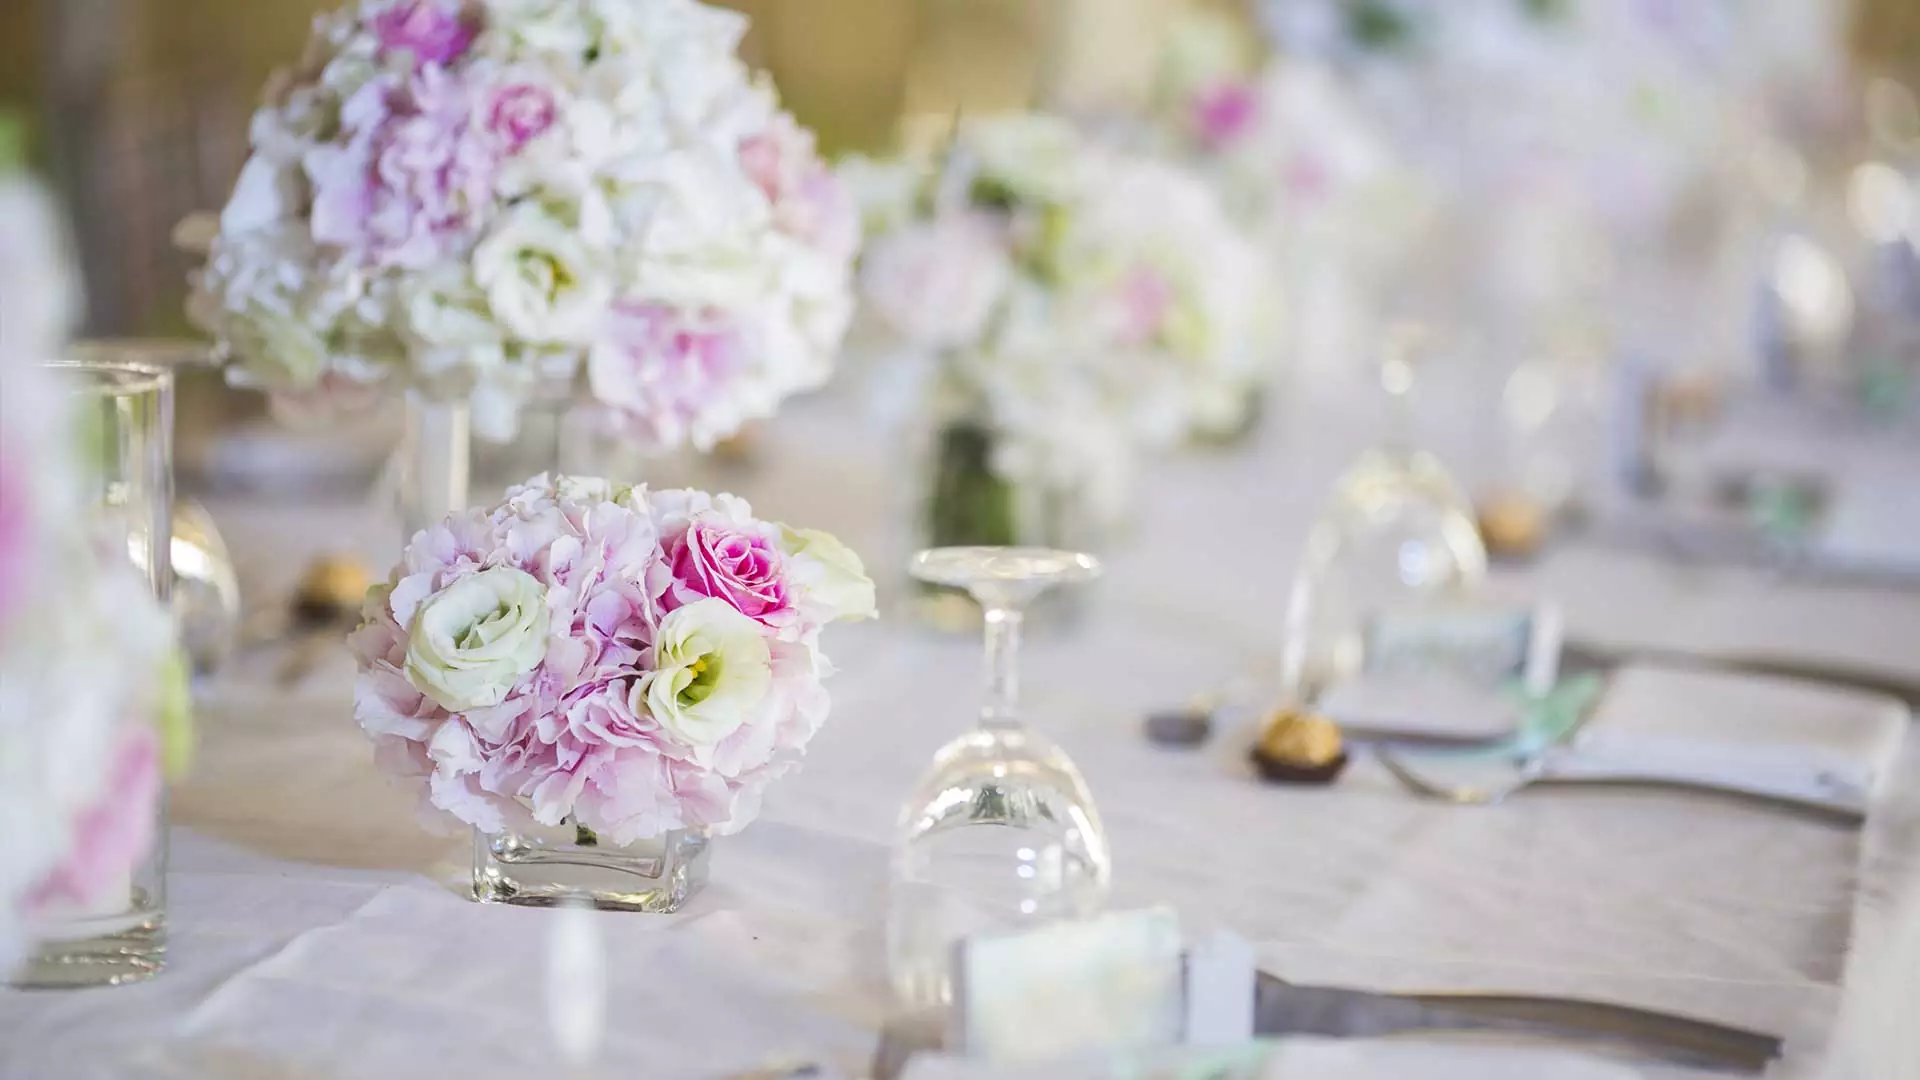 Top 4 Amazing Wedding Themes for Every Bridal Style